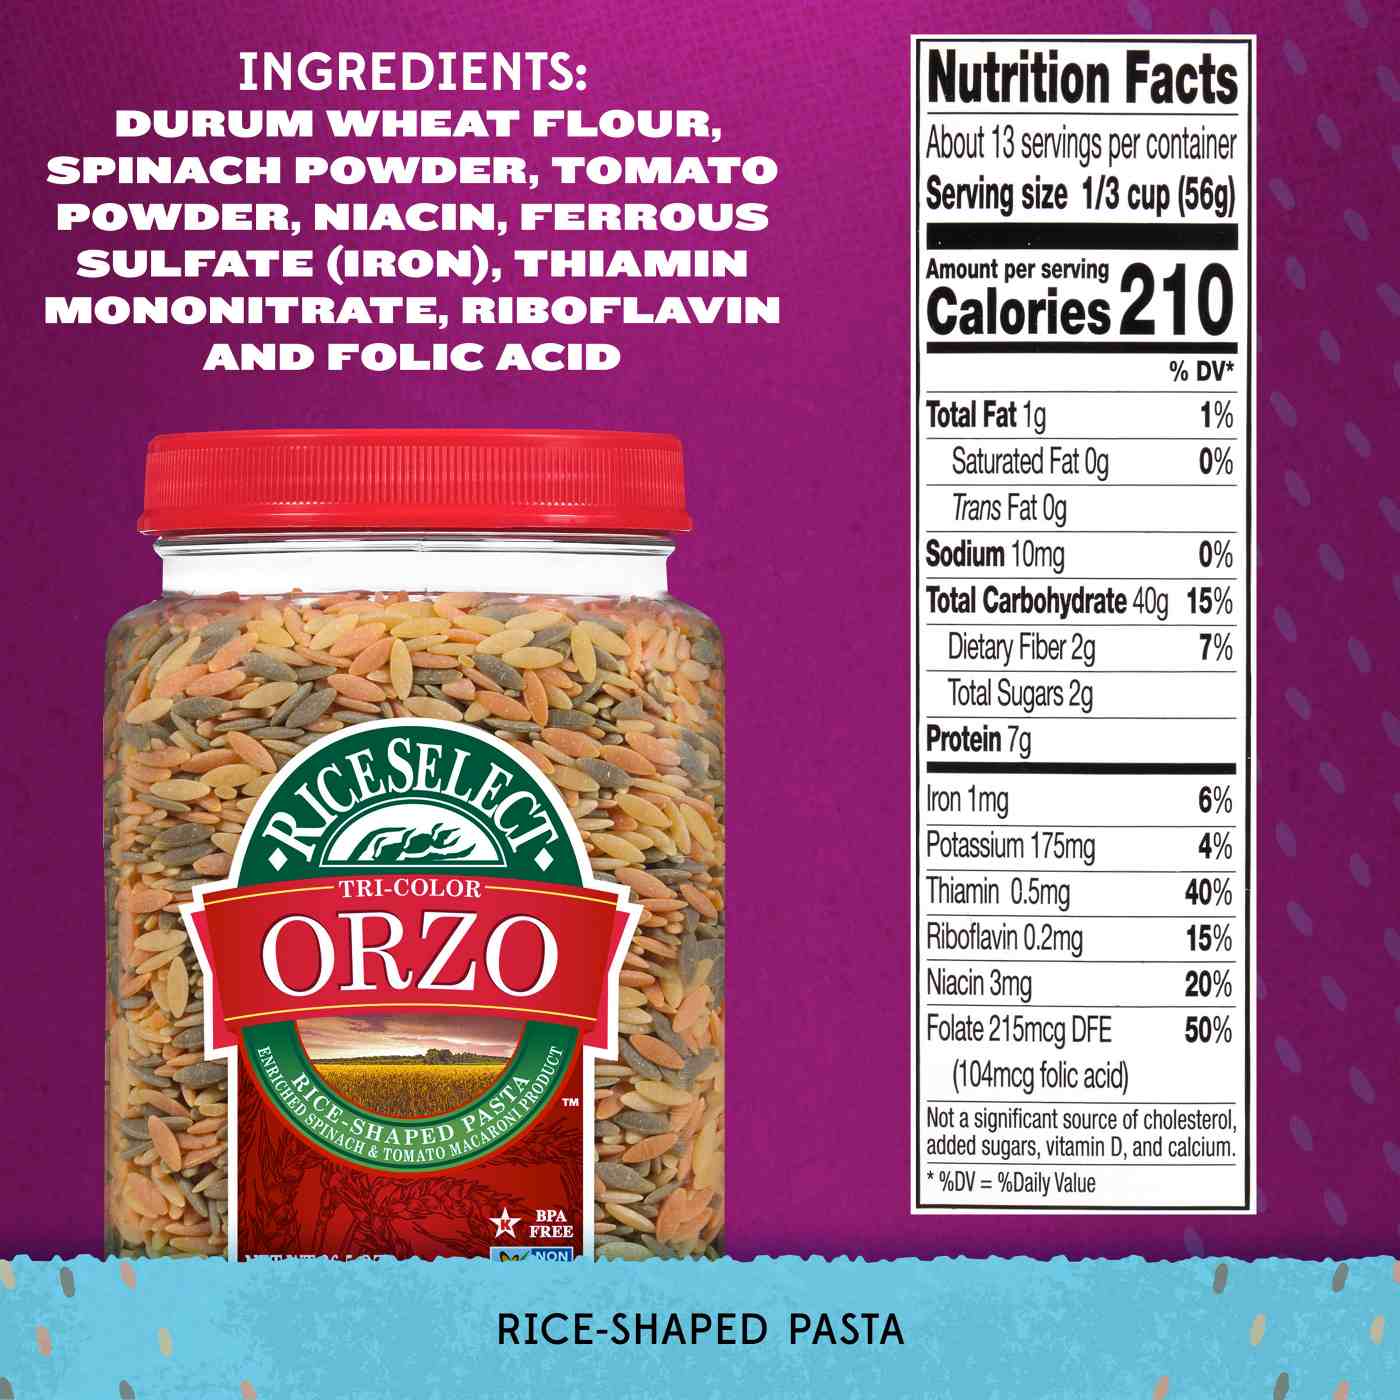 RiceSelect Tri-Color Orzo; image 3 of 6